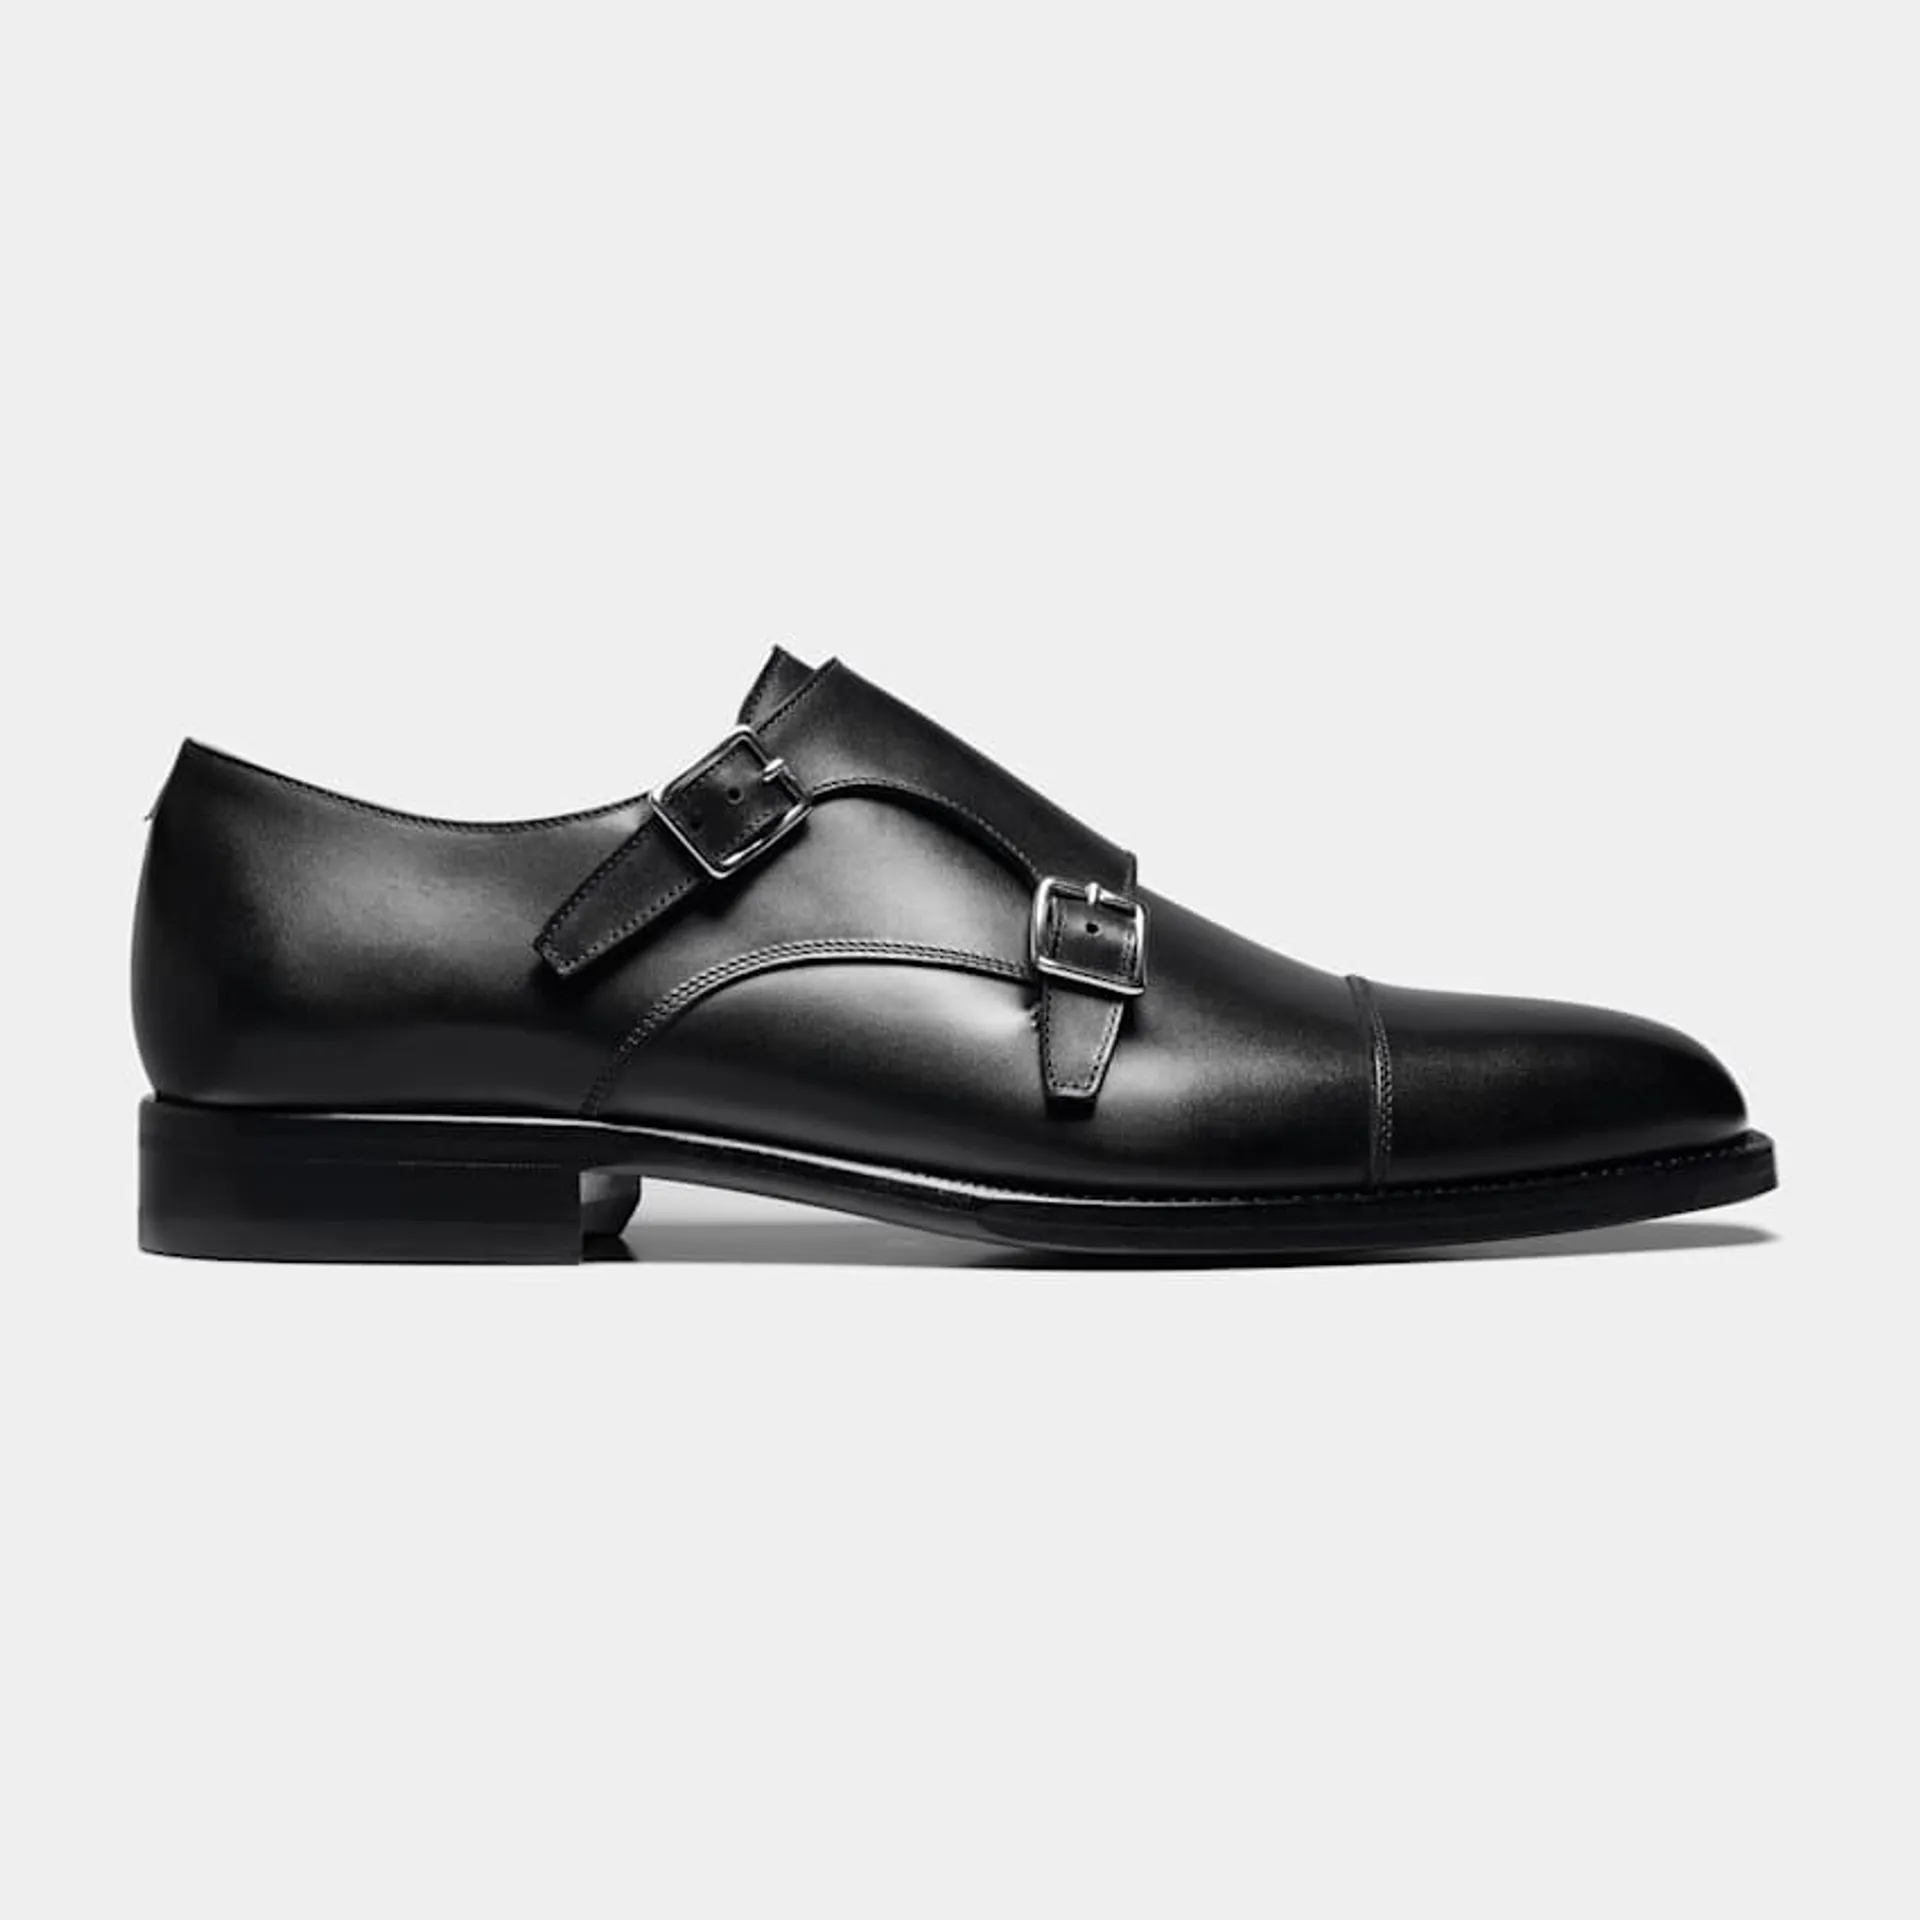 Made in Italy from supple Italian calf leather, these elegant black monk straps feature full leather lining and sole, and are constructed in a Blake stitch.